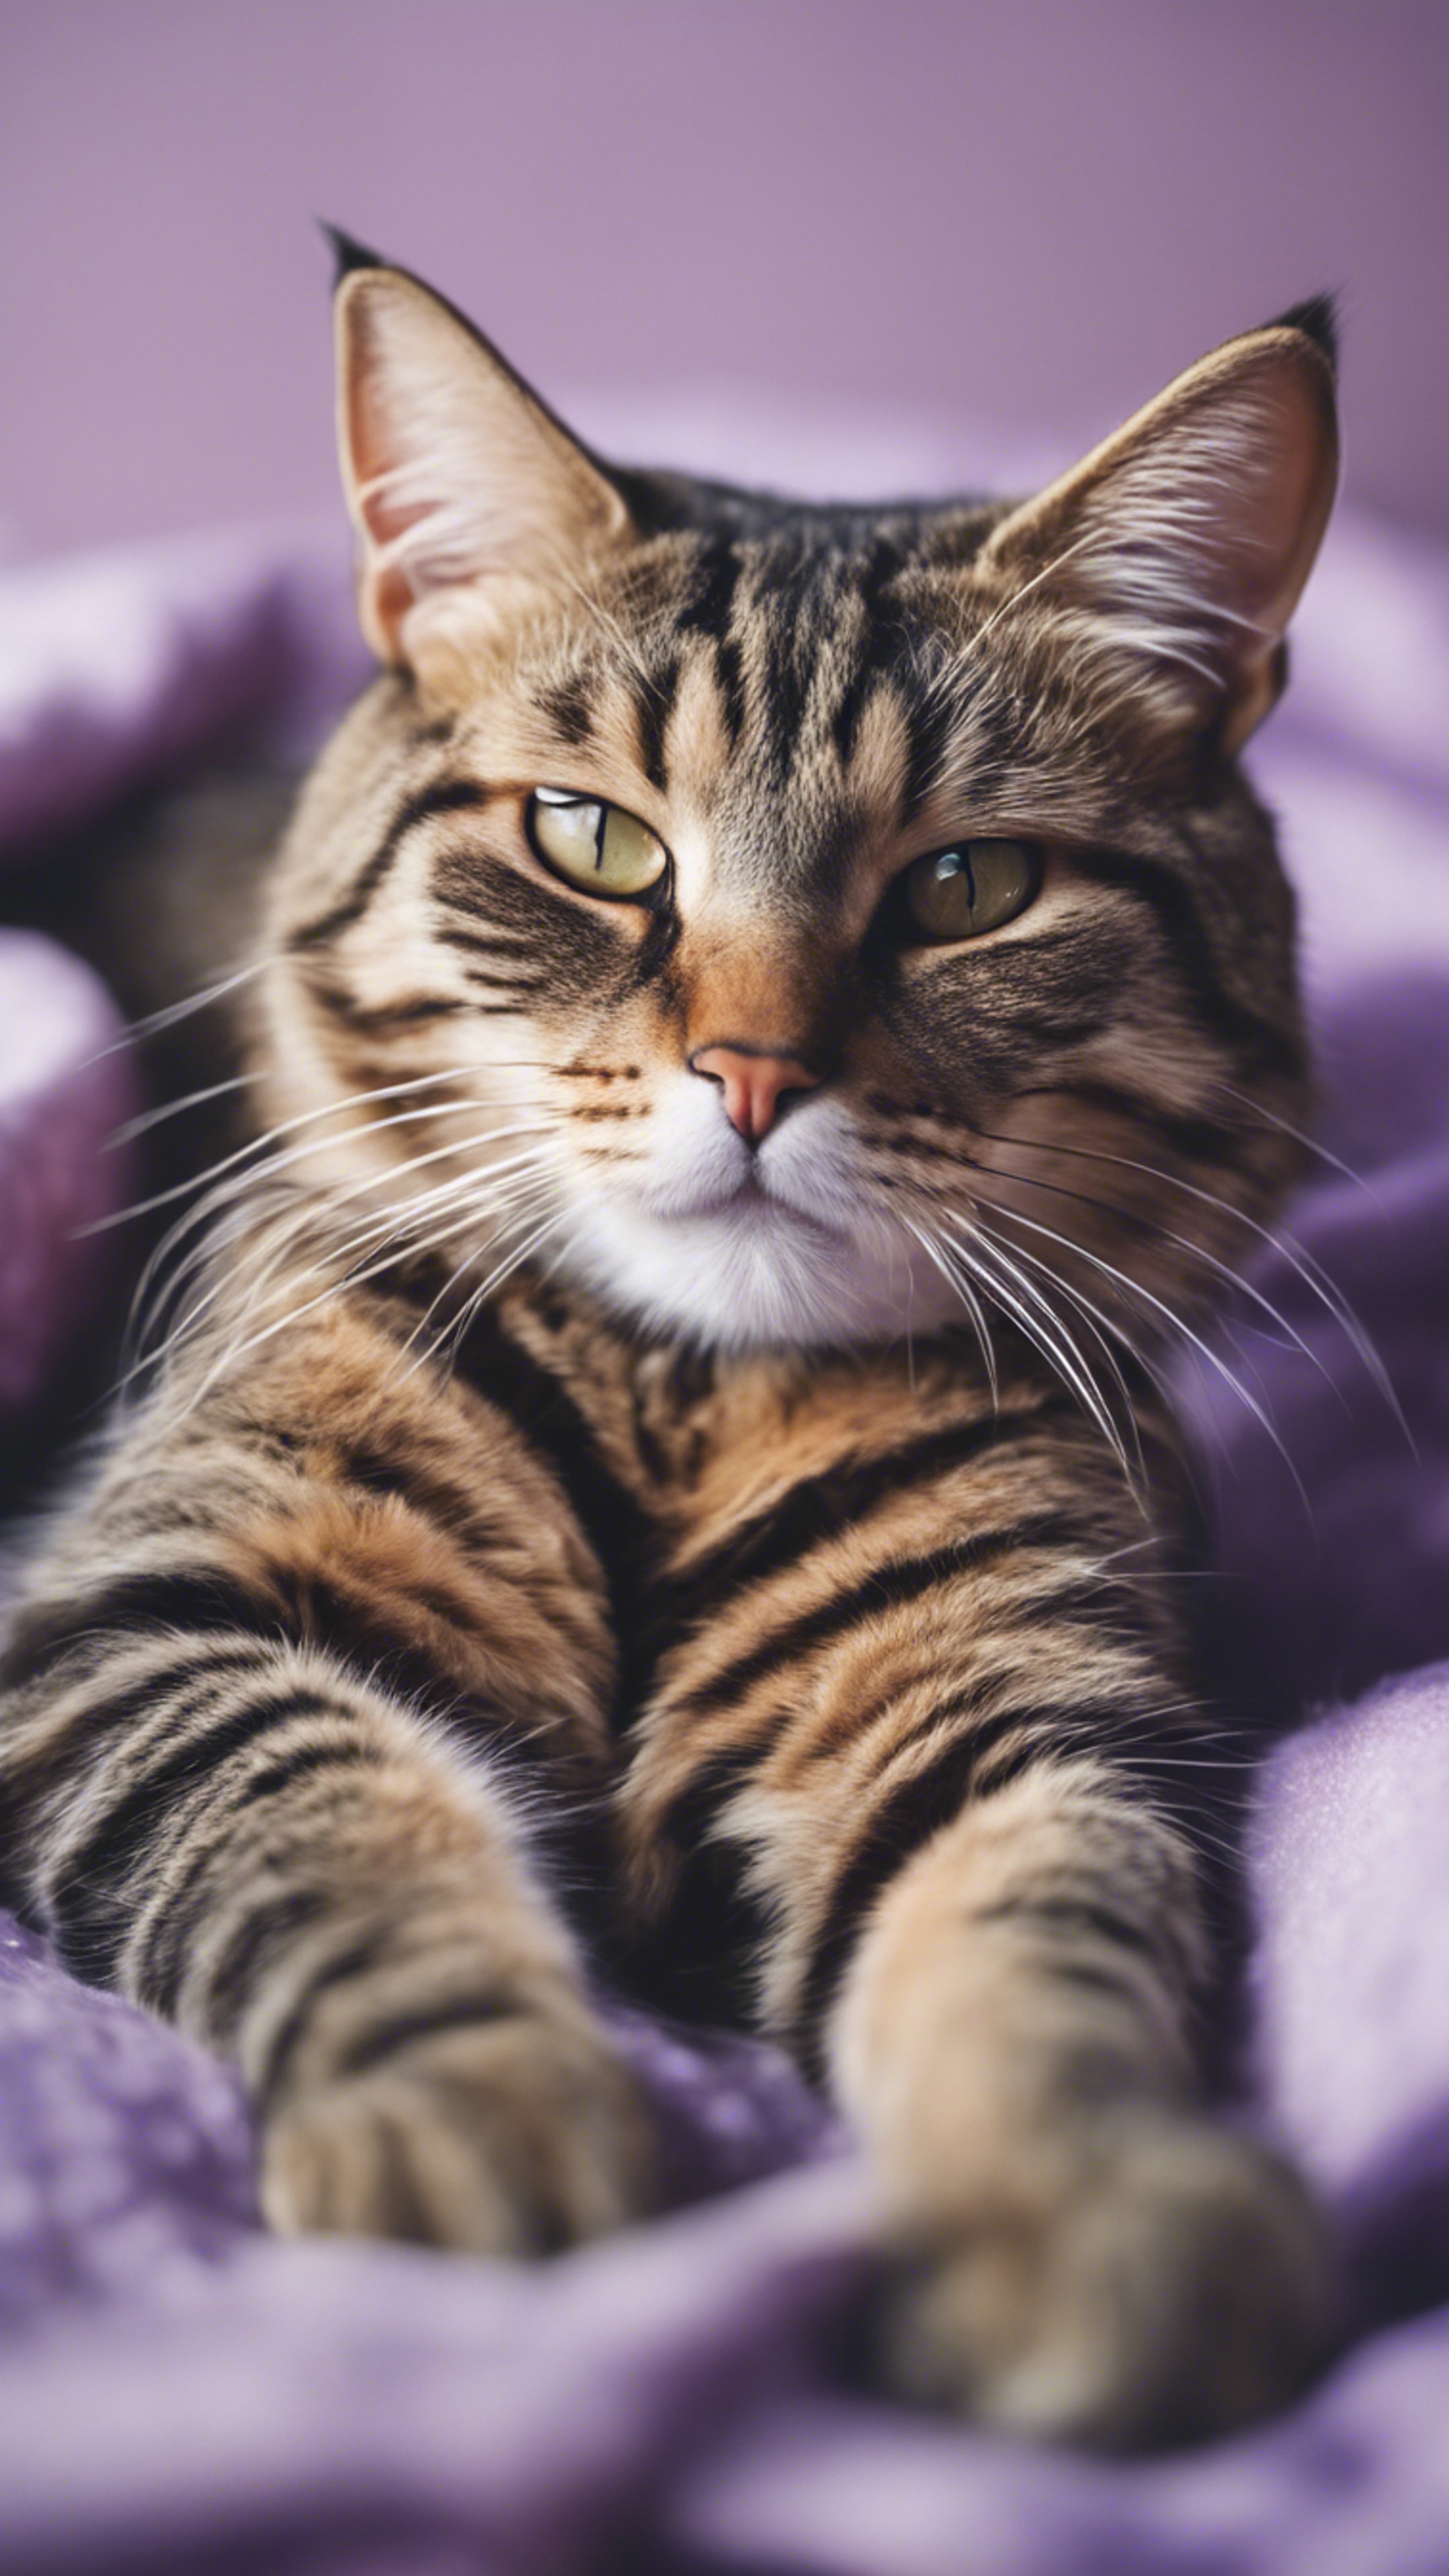 A candid portrait of a tabby cat lounging on a pastel purple blanket. 墙纸[f4cf510d1a1d426195dc]